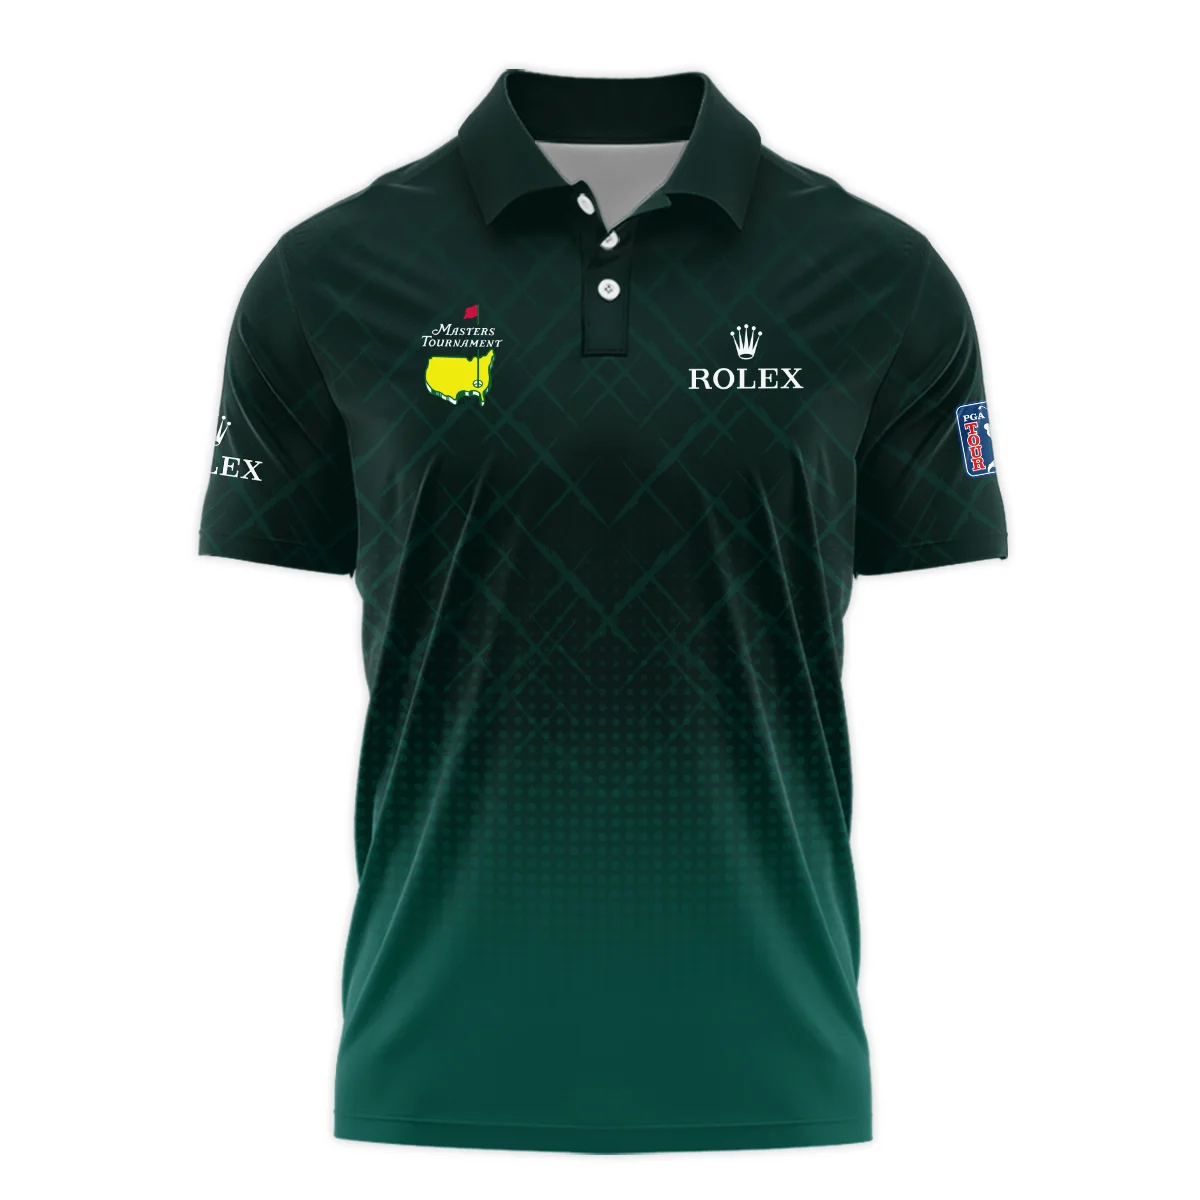 Rolex Masters Tournament Sport Jersey Pattern Dark Green Polo Shirt Style Classic Polo Shirt For Men